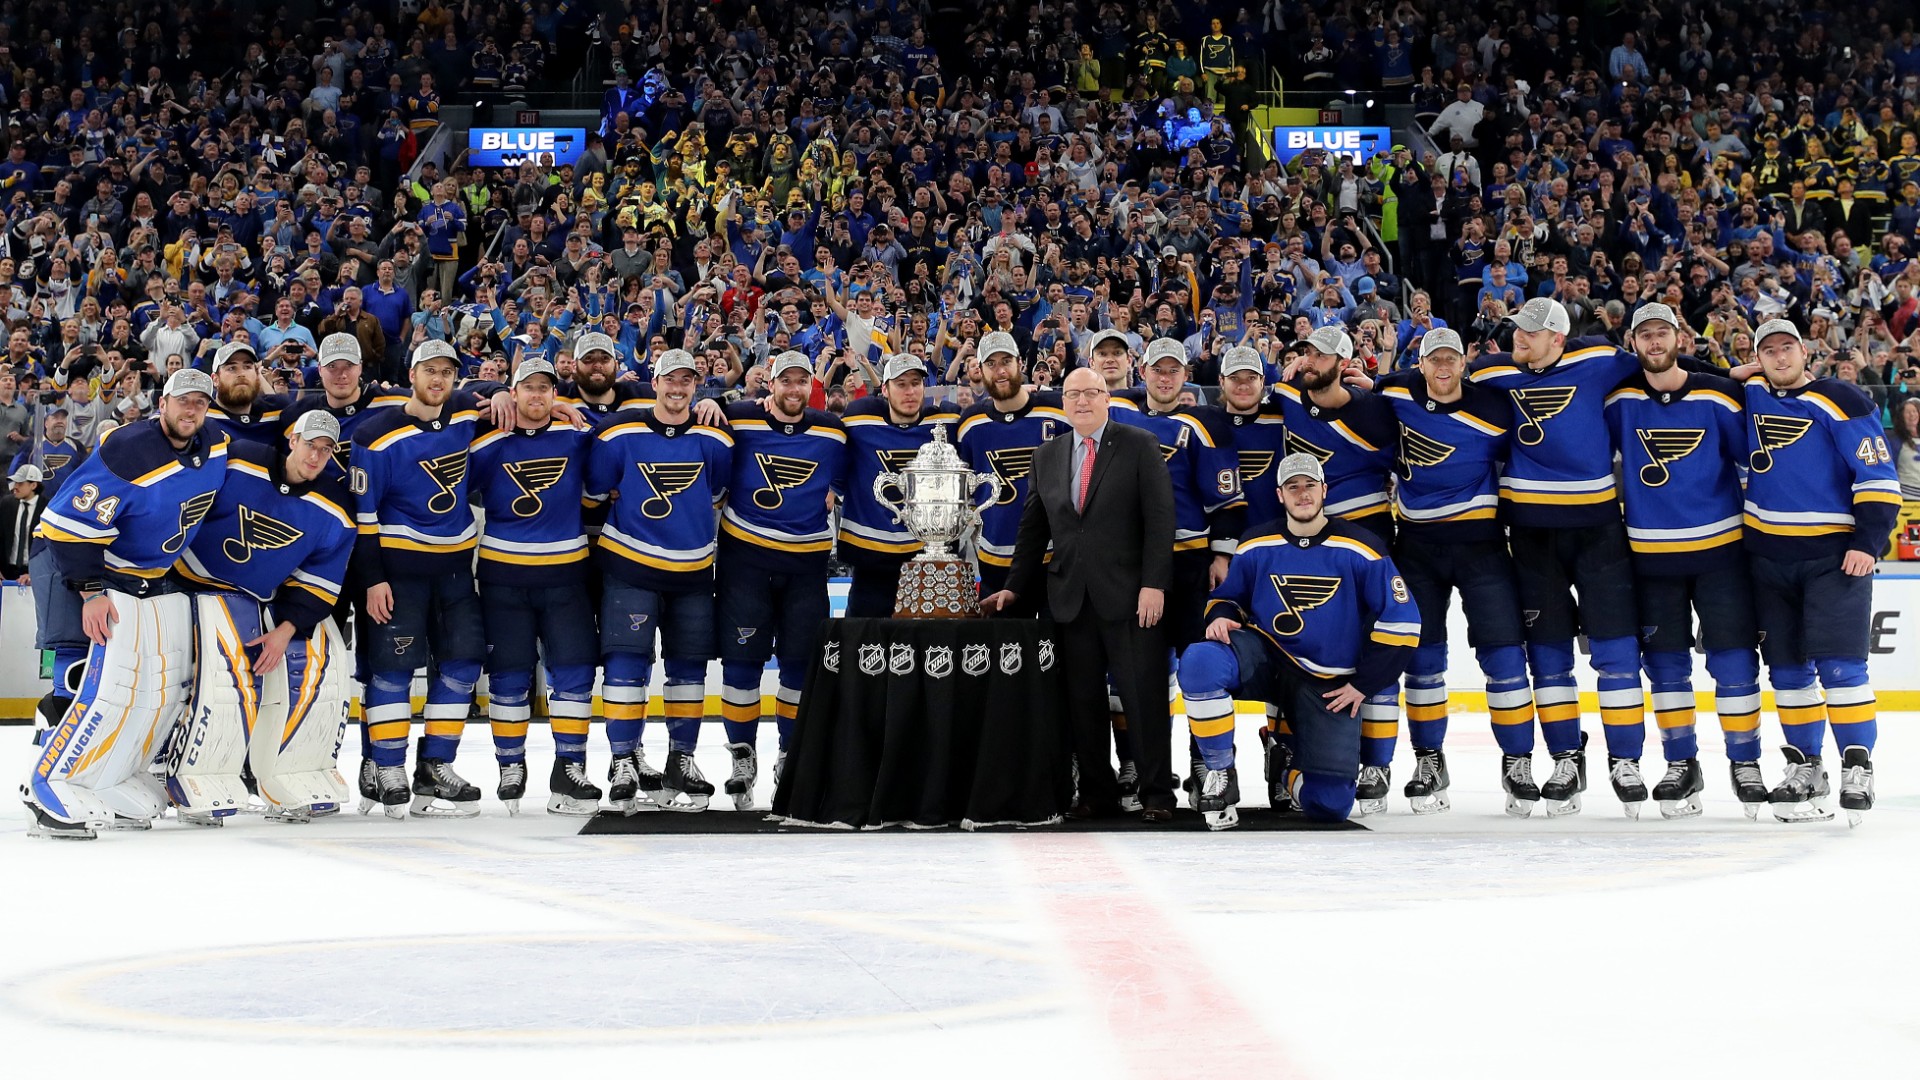 Stanley Cup 2019: A look at the NHL (and more) since the last time the Blues played for the Cup ...